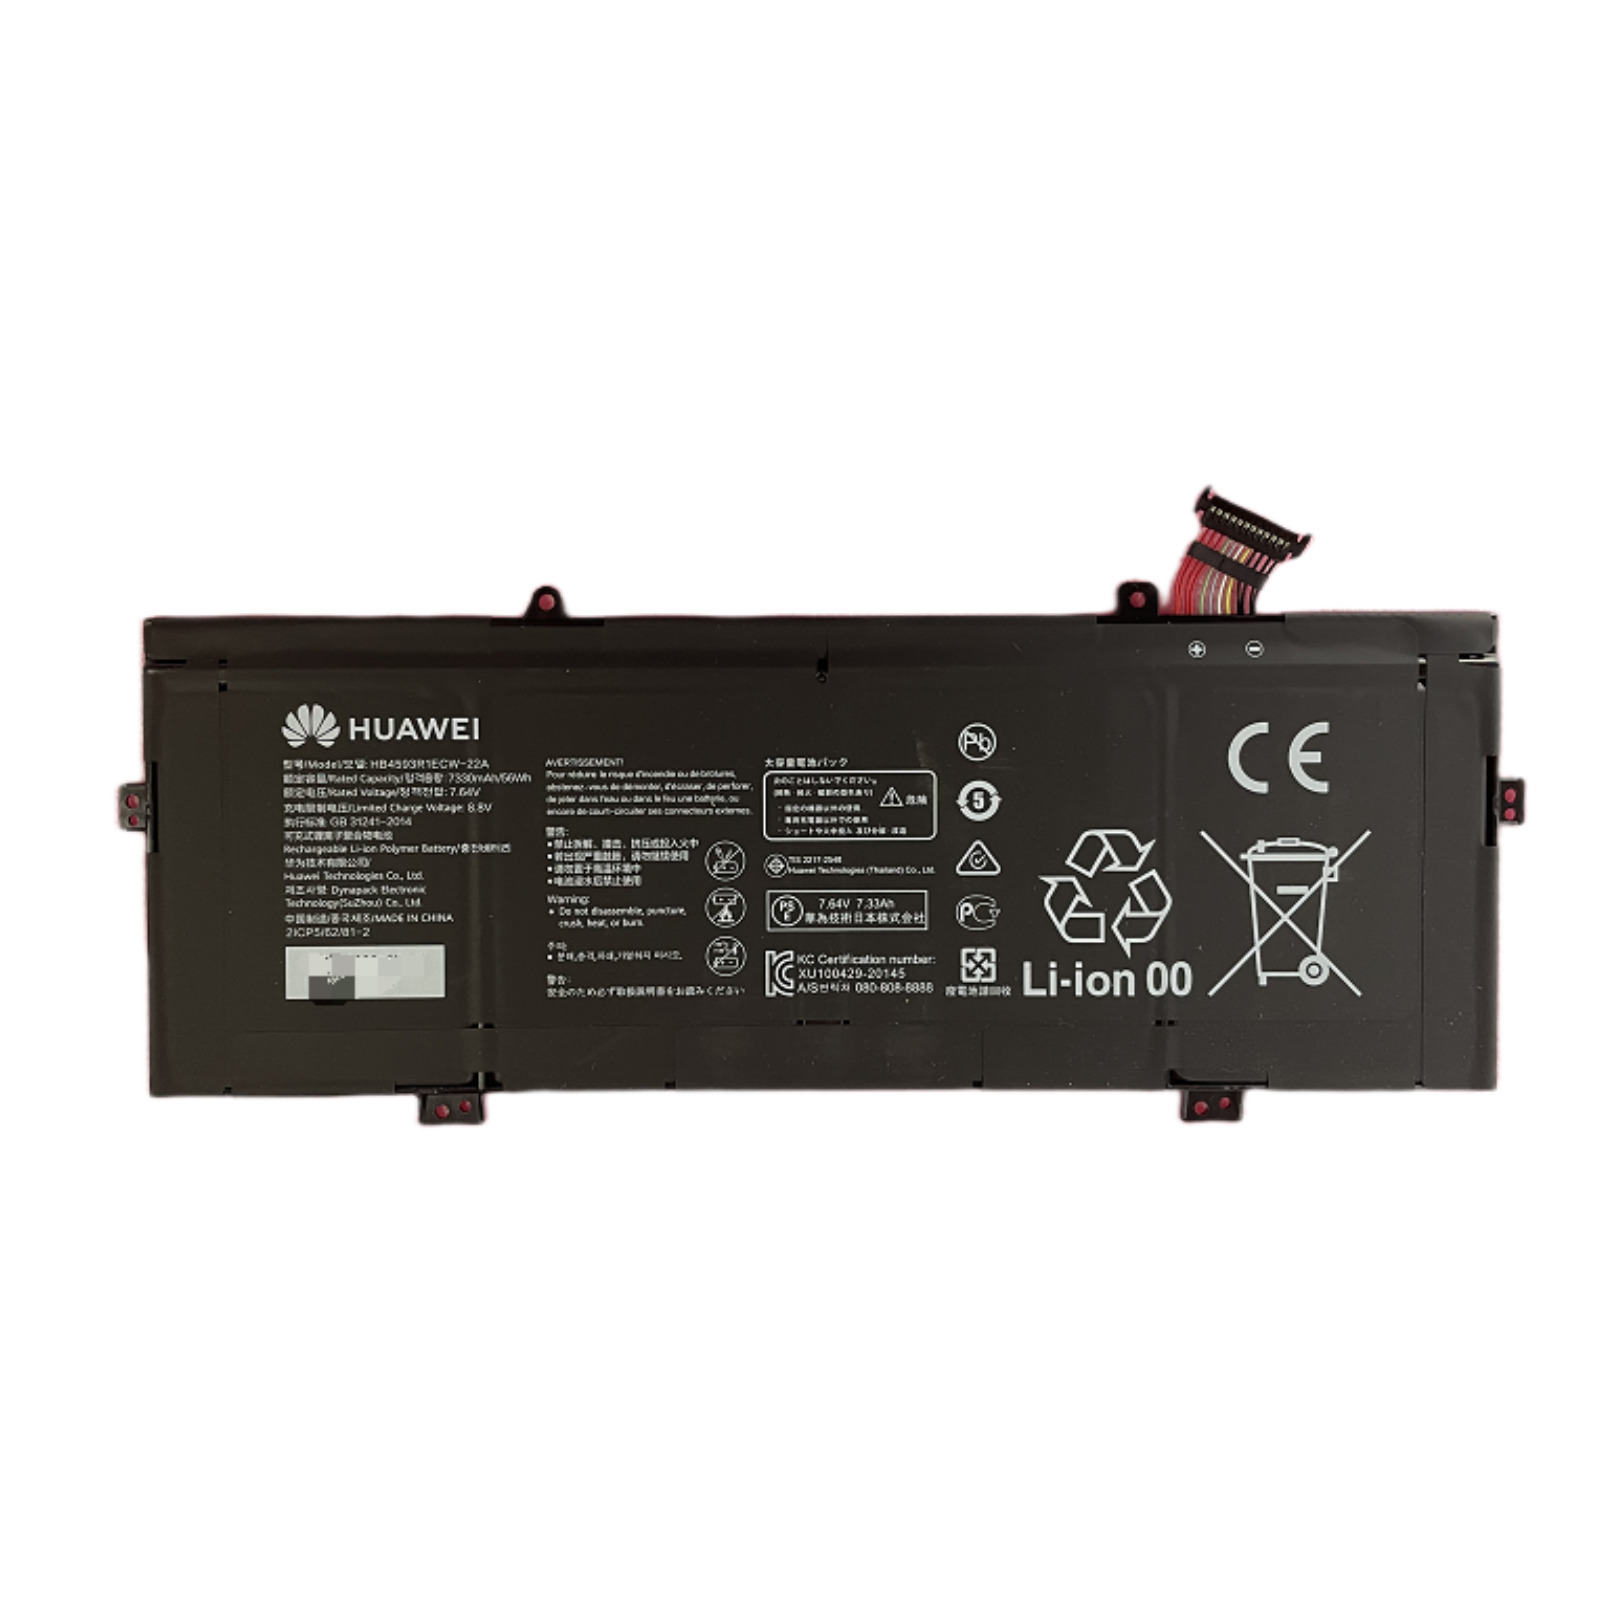 Genuine 7.6V 56.3Wh HB4593R1ECW battery for Huawei Matebook KPL-W00 MACH-WX9-PCB